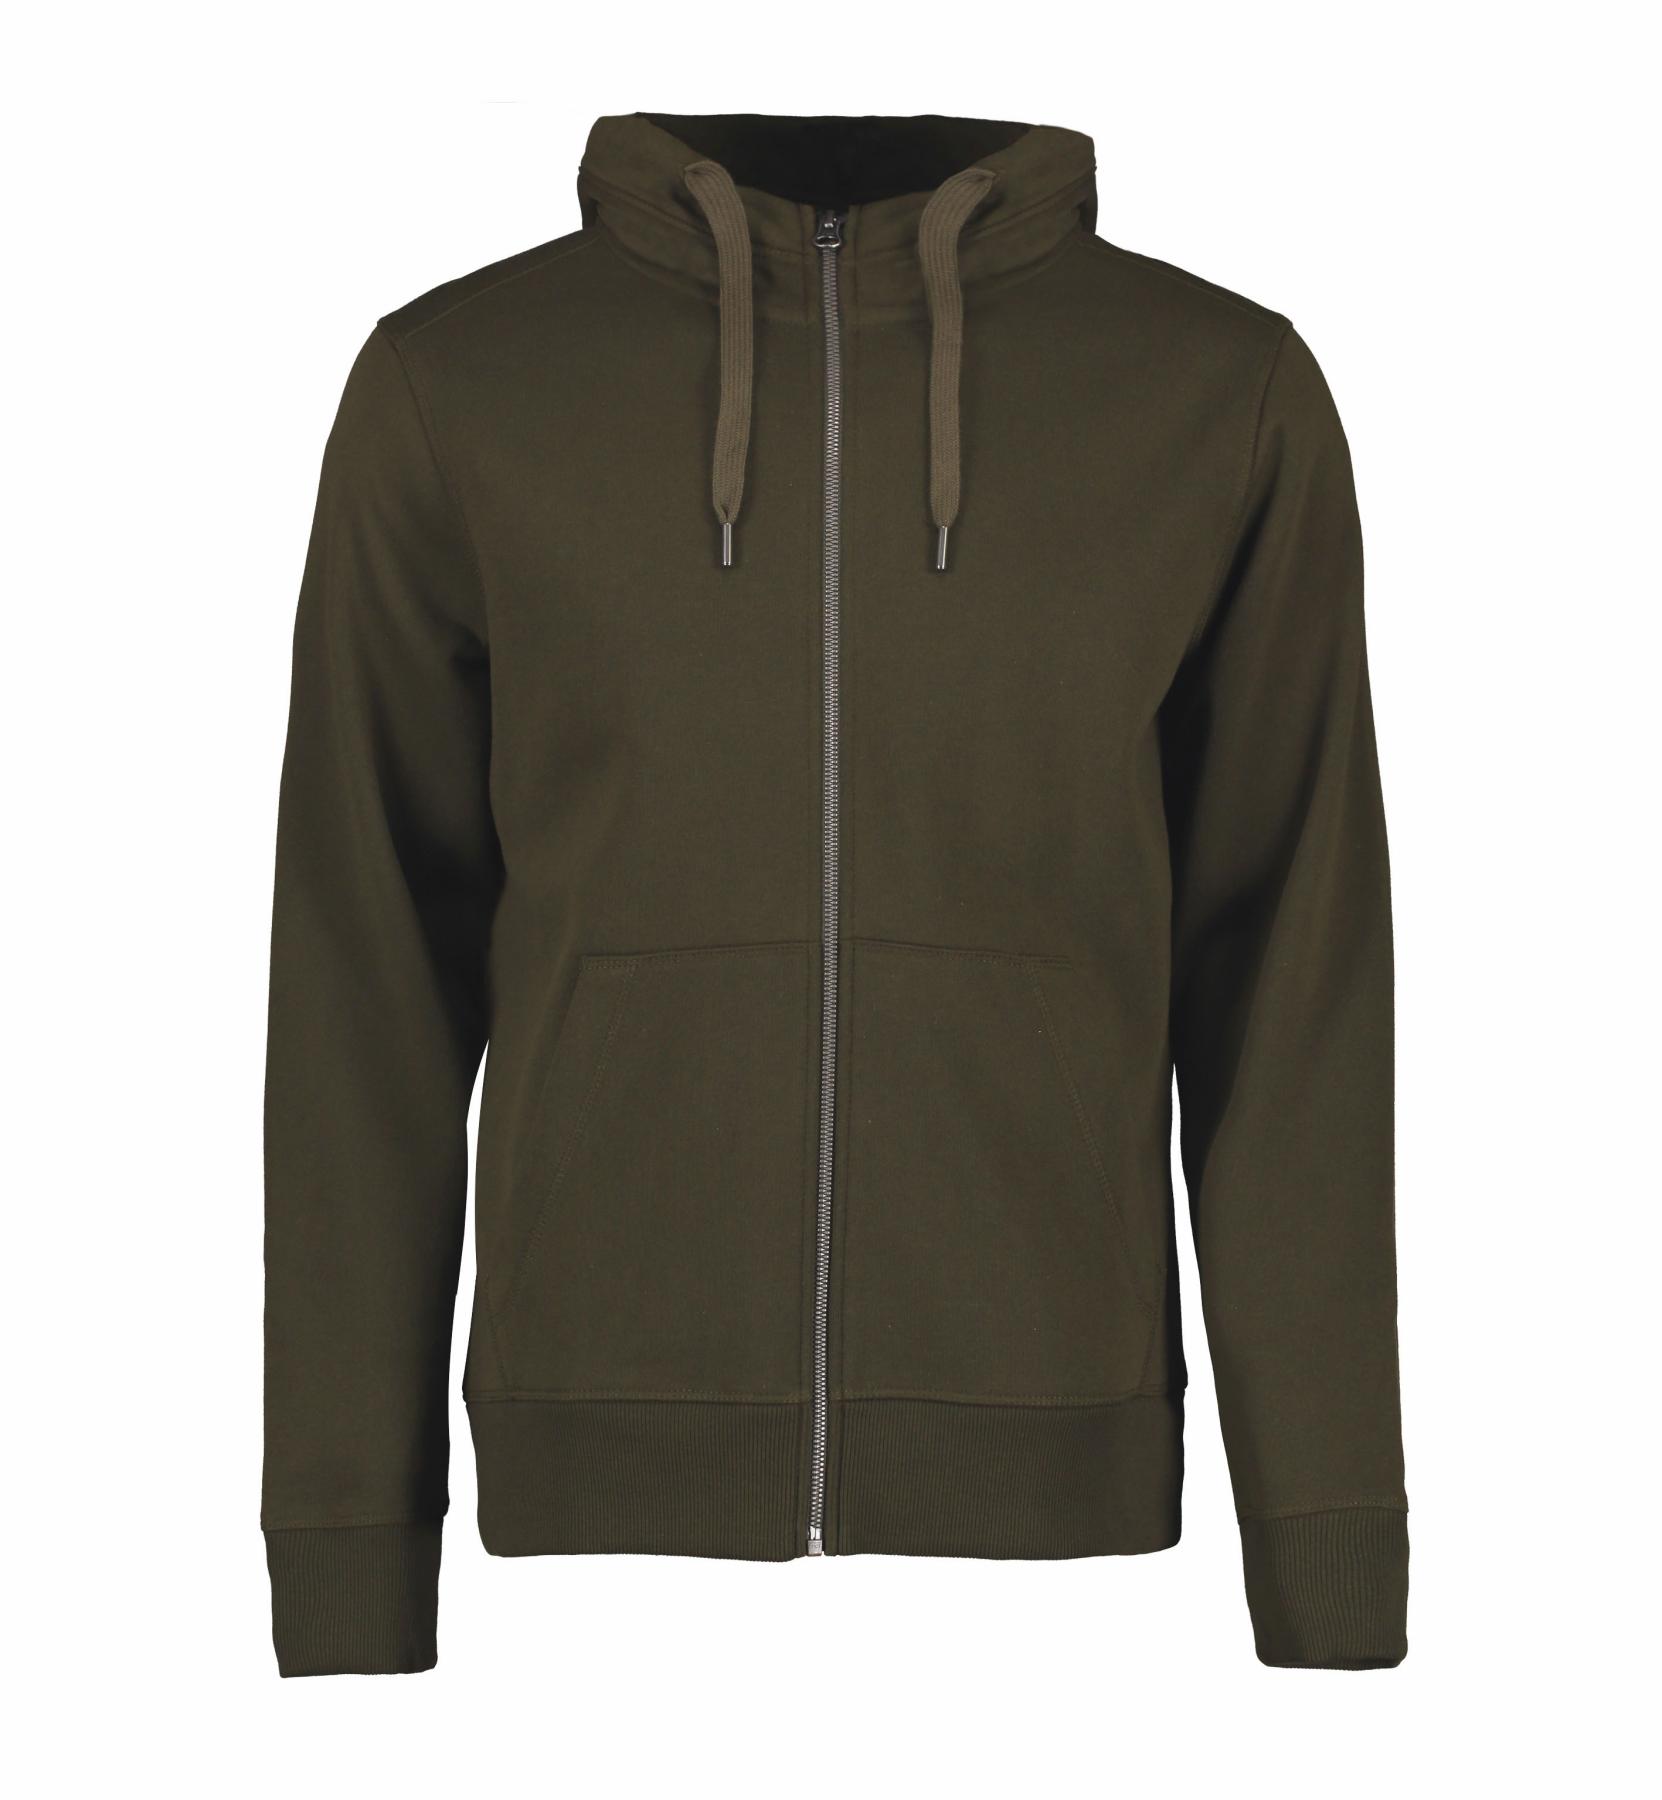 Mens CORE Hoodie Jacket Classic 300 g/m² ID Identity® Olive S